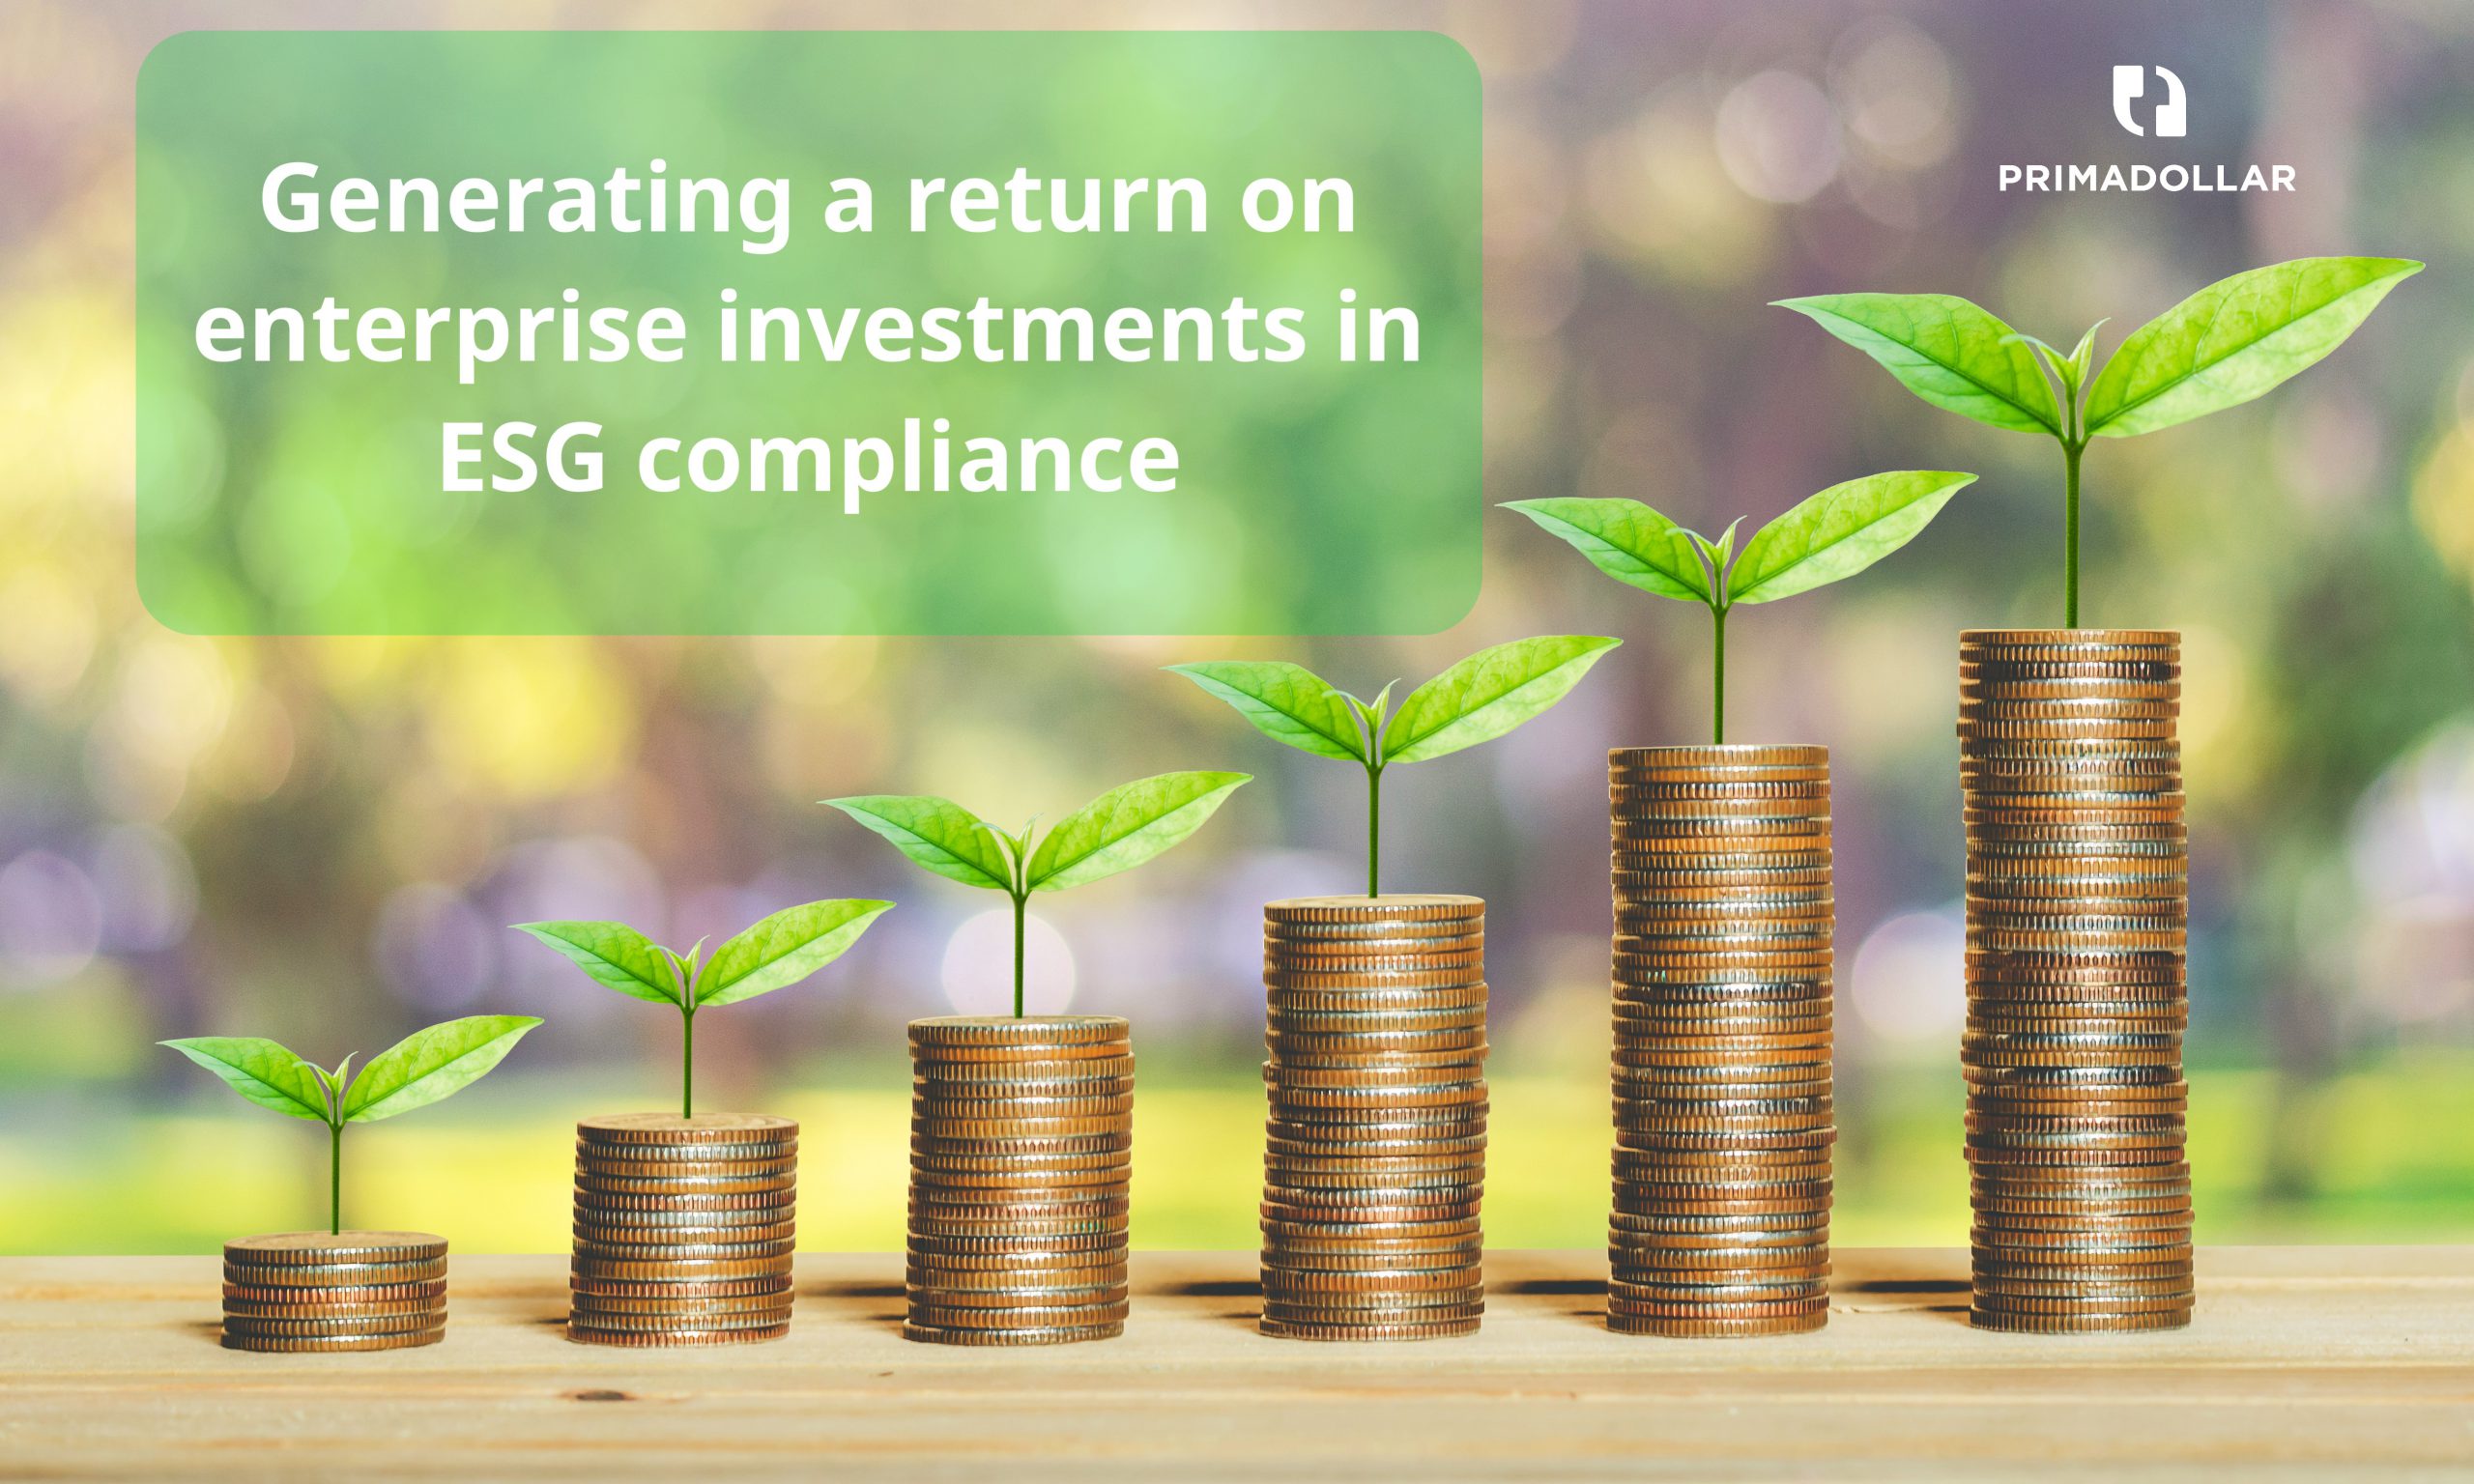 Getting a return on enterprise investment in ESG compliance